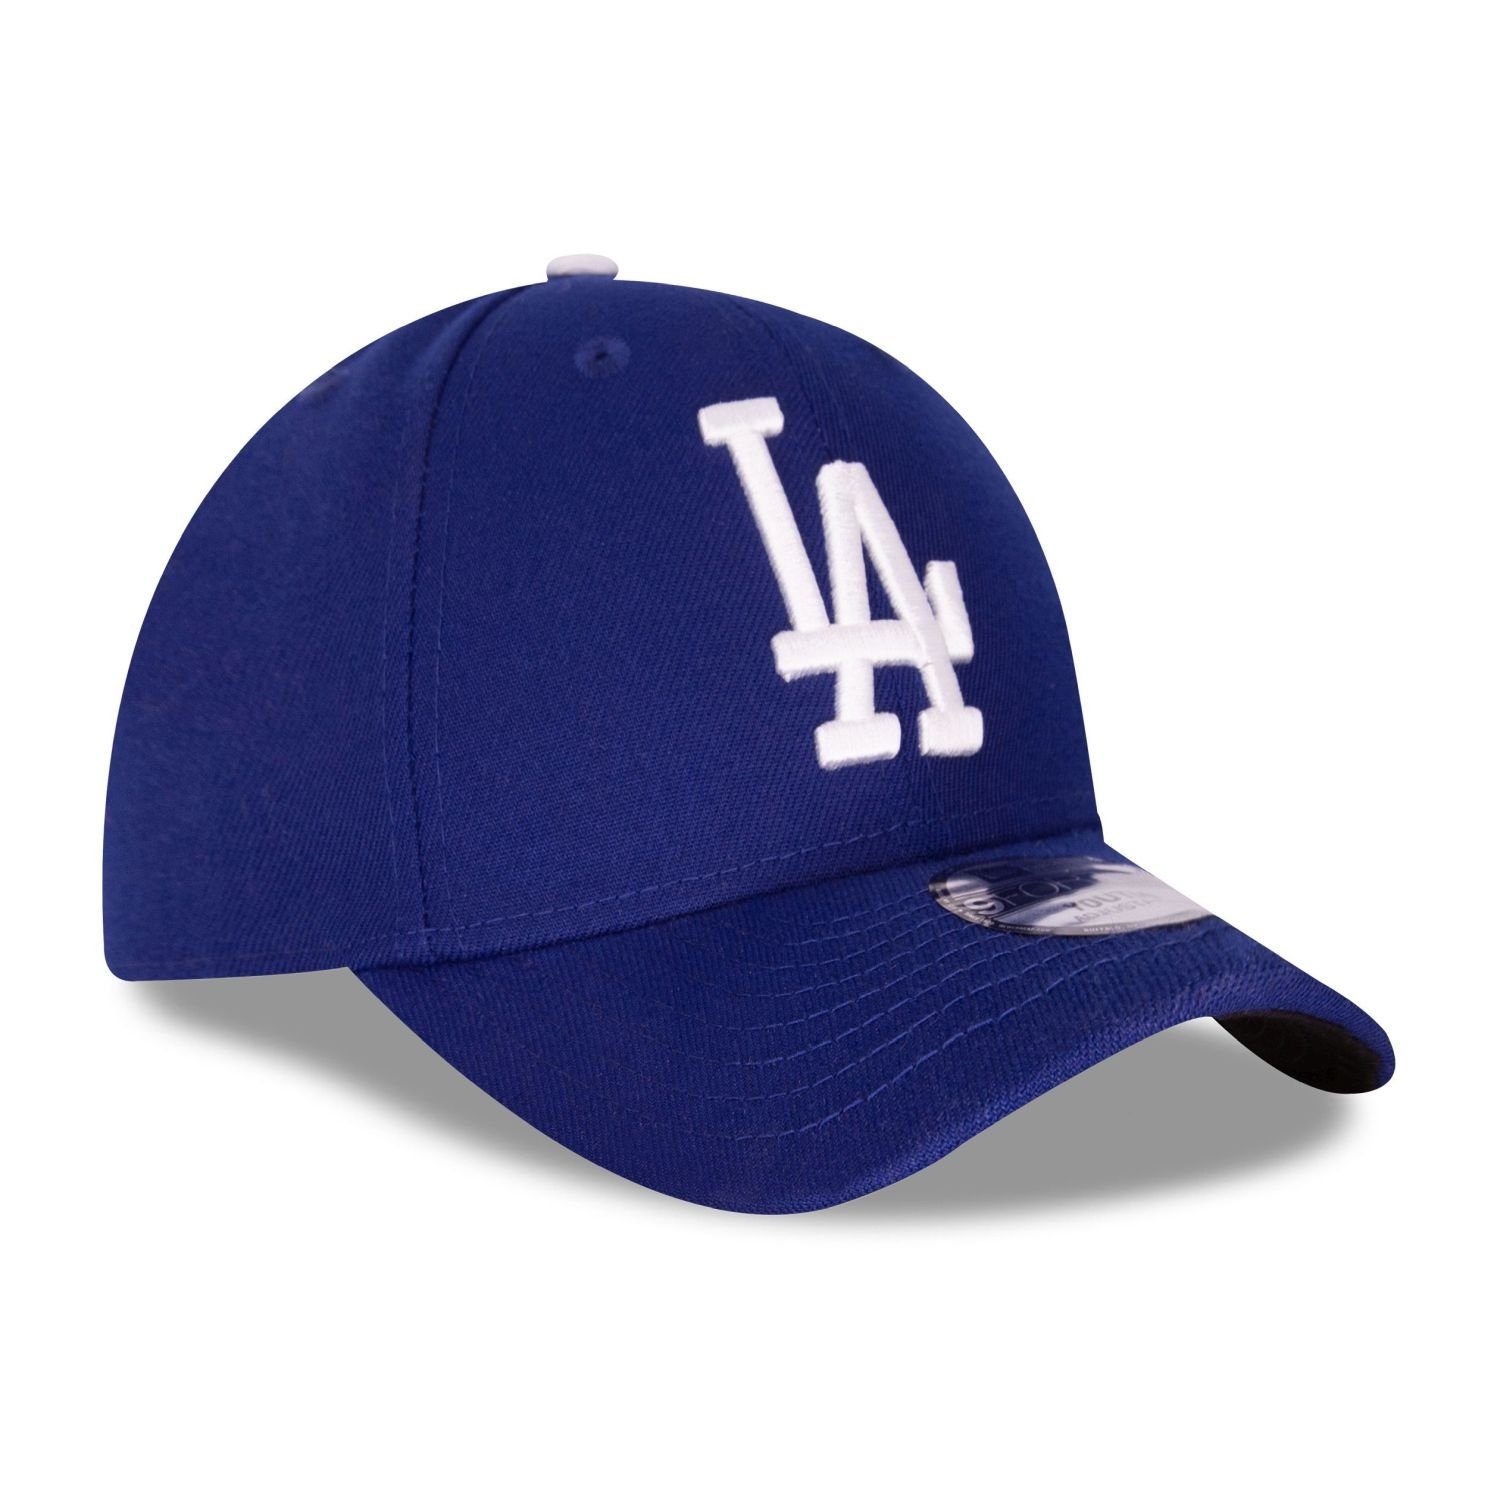 New Era Baseball Cap Youth LEAGUE Dodgers Los Angeles 9Forty